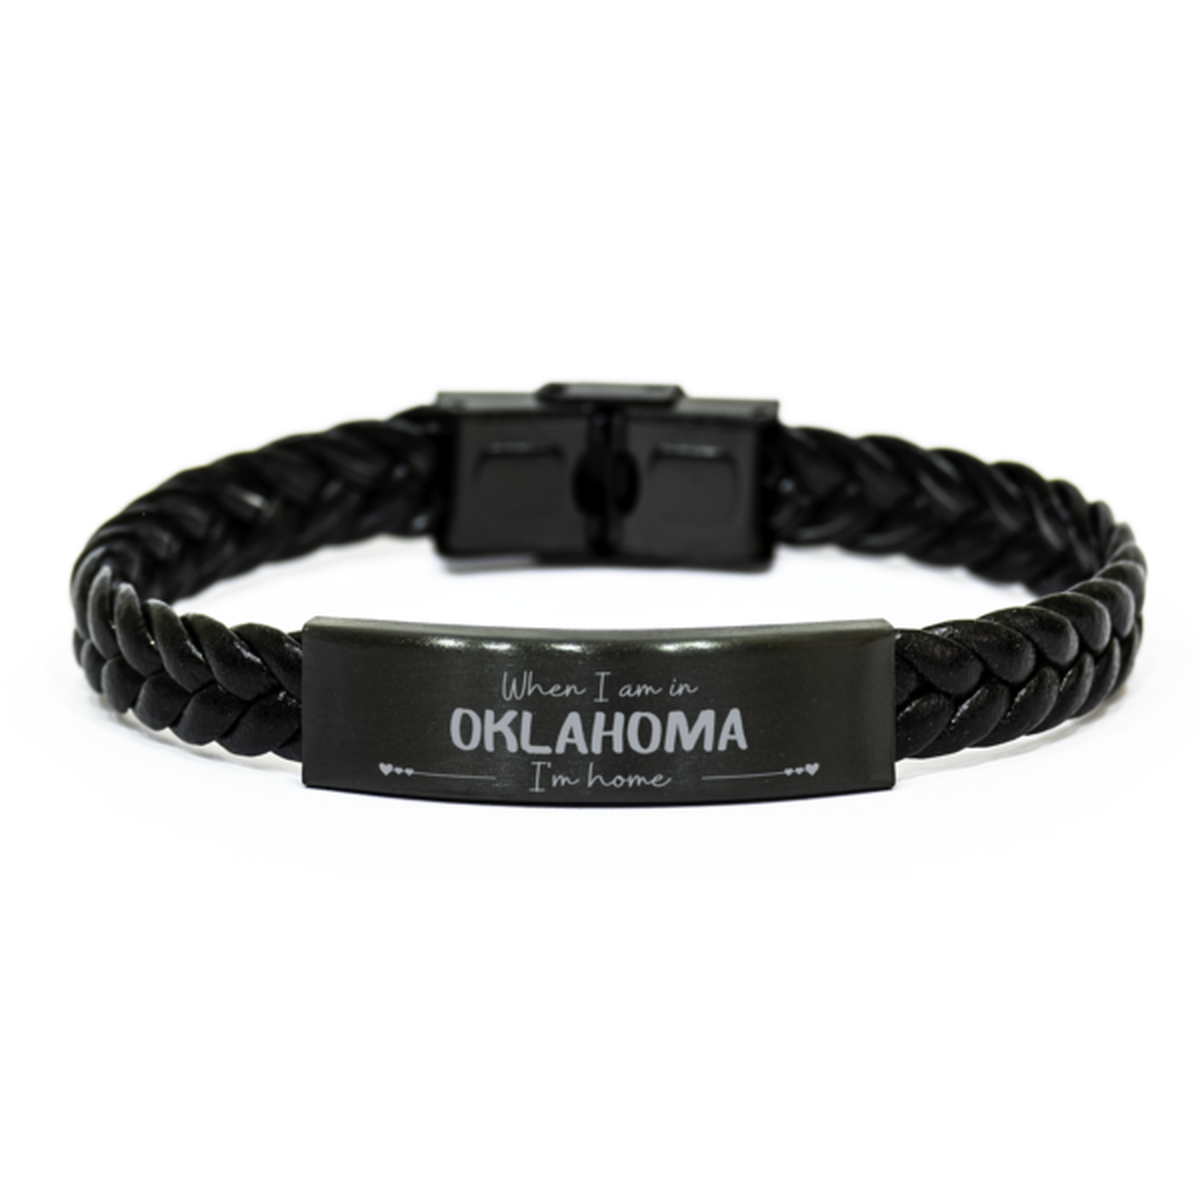 When I am in Oklahoma I'm home Braided Leather Bracelet, Cheap Gifts For Oklahoma, State Oklahoma Birthday Gifts for Friends Coworker